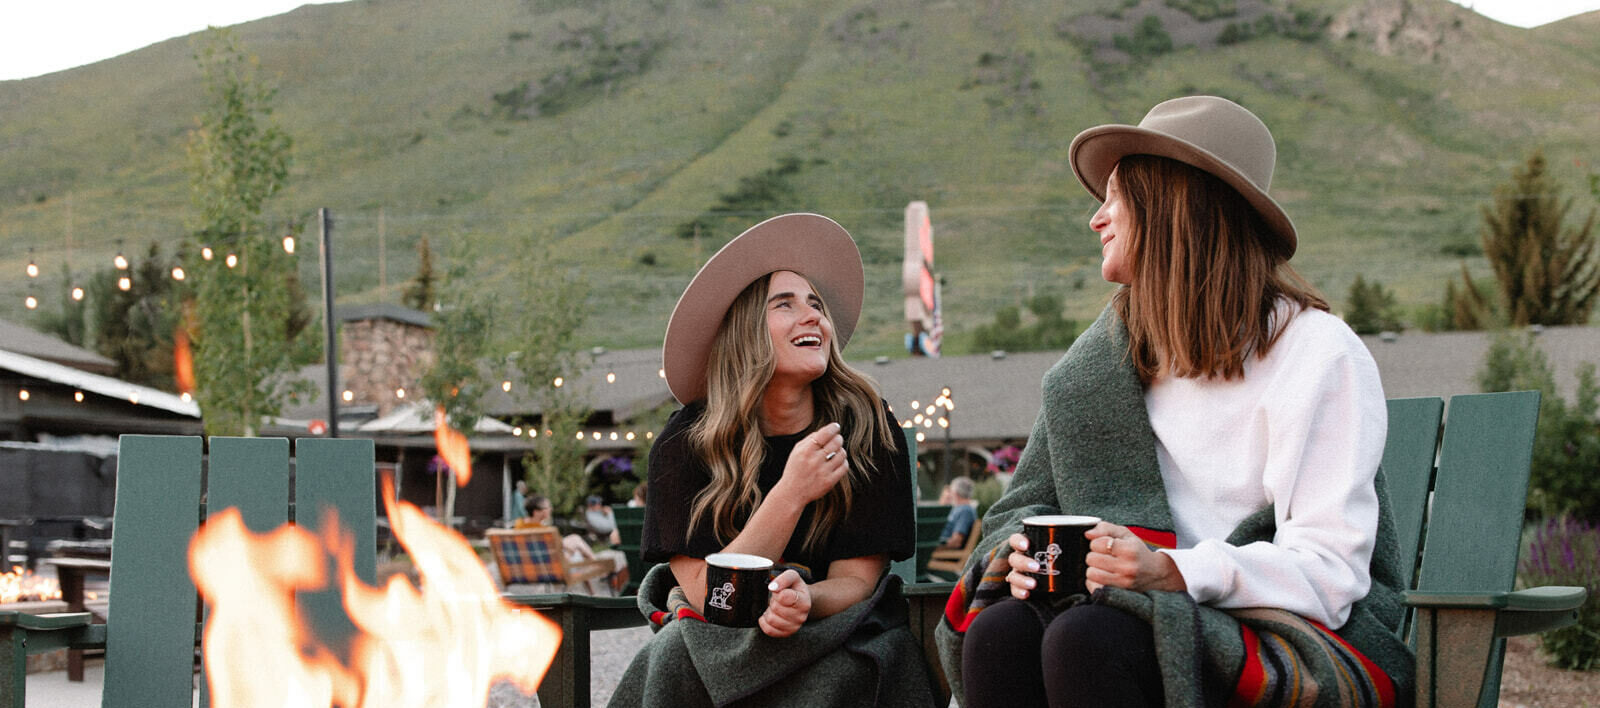 Two girls share coffee, smiles, and conversation by the bonfire, creating a cozy atmosphere.